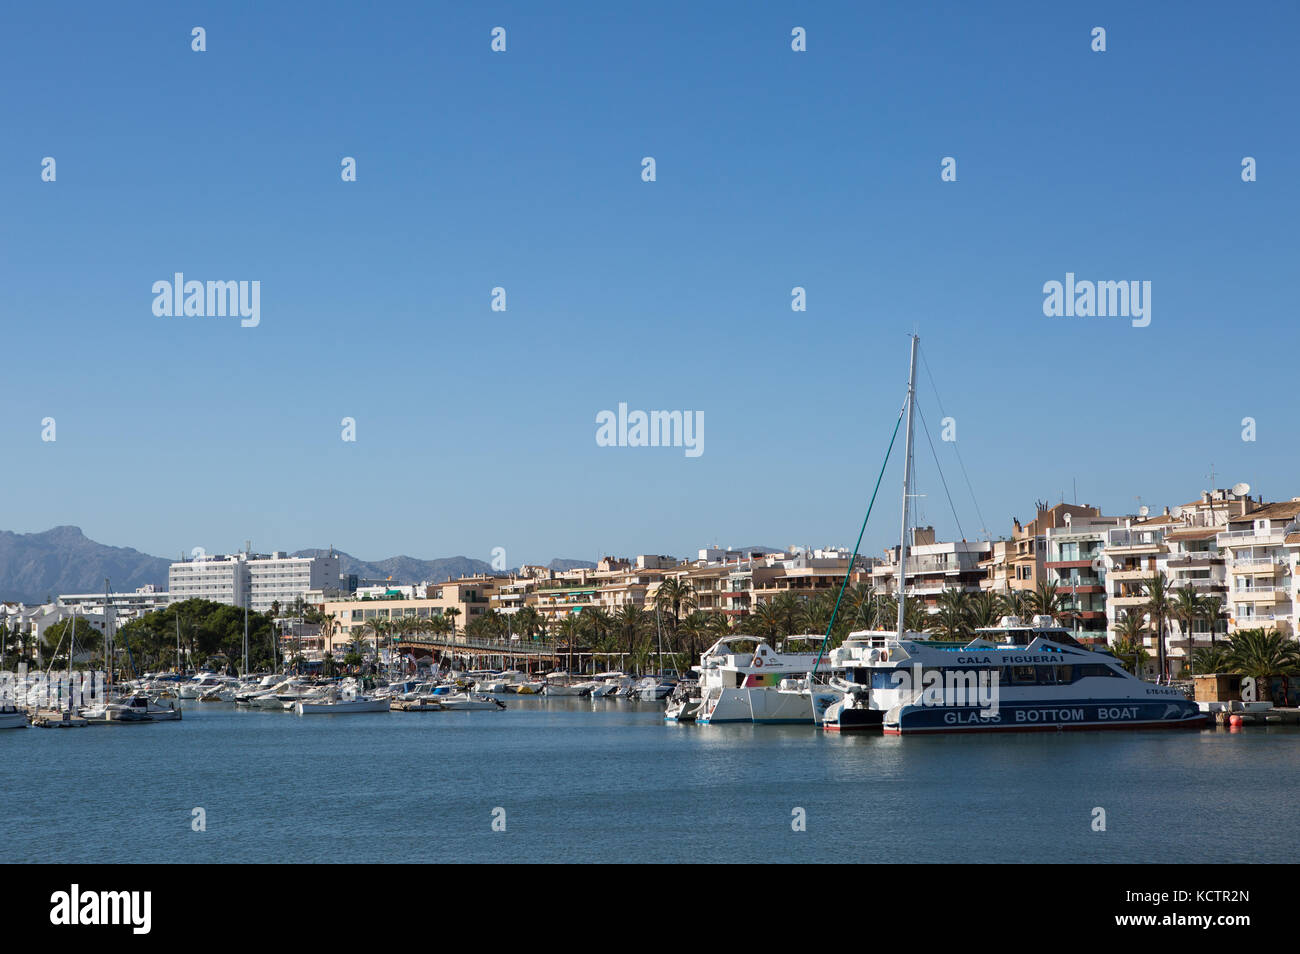 Boats moored at harbour, buildings  in background, Puerto de Alcudia, Alcudia, Majorca, Balearic Islands, Spain. Stock Photo